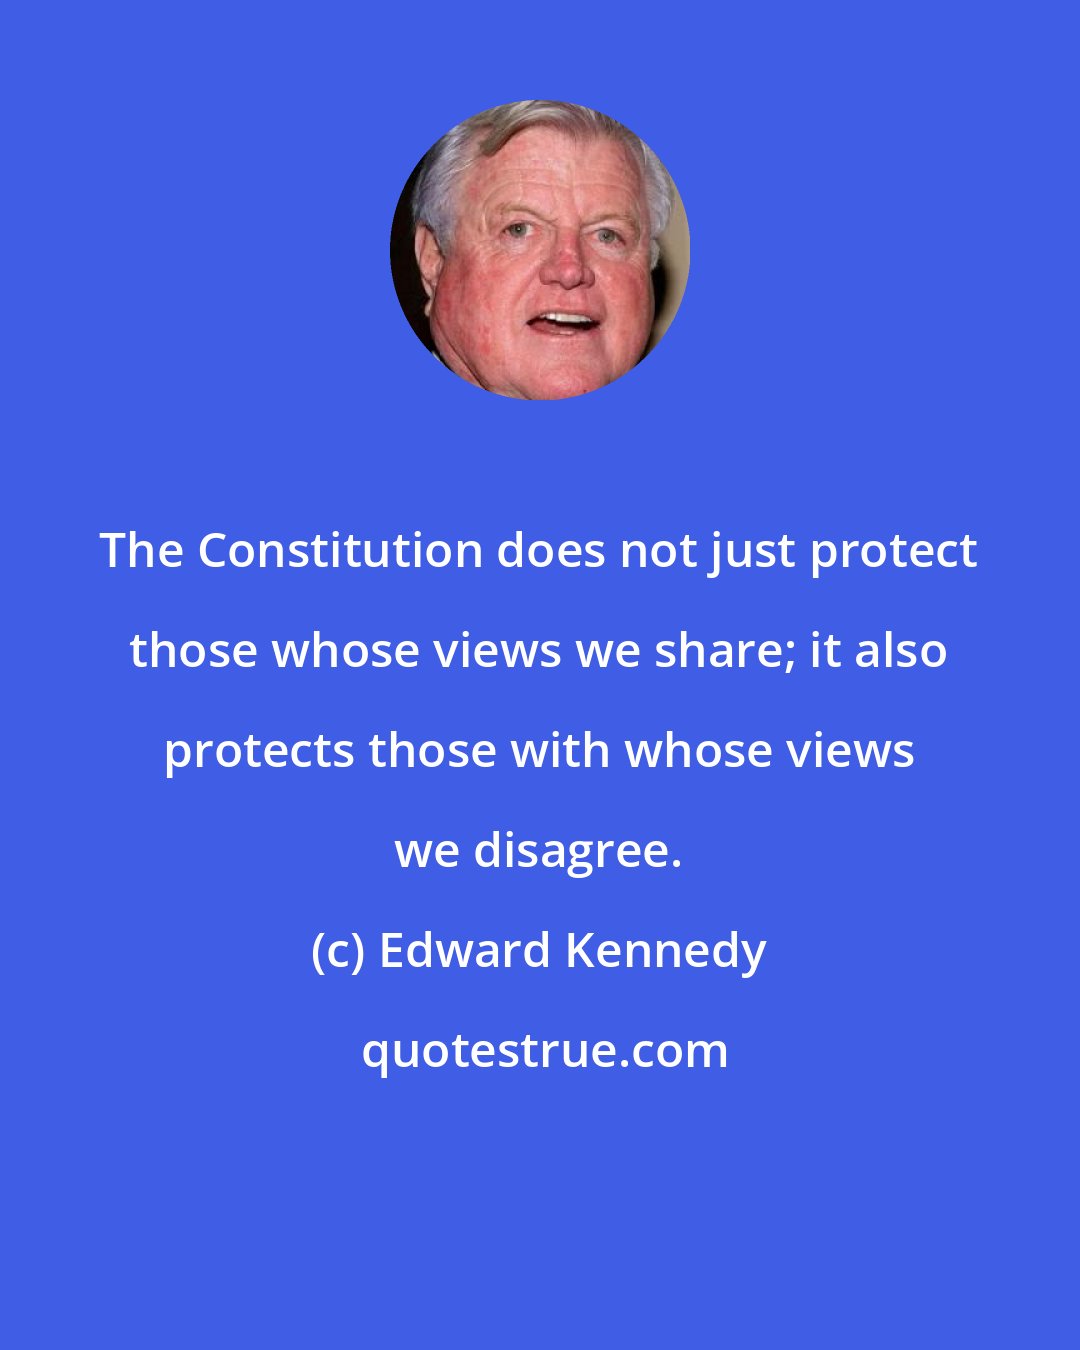 Edward Kennedy: The Constitution does not just protect those whose views we share; it also protects those with whose views we disagree.